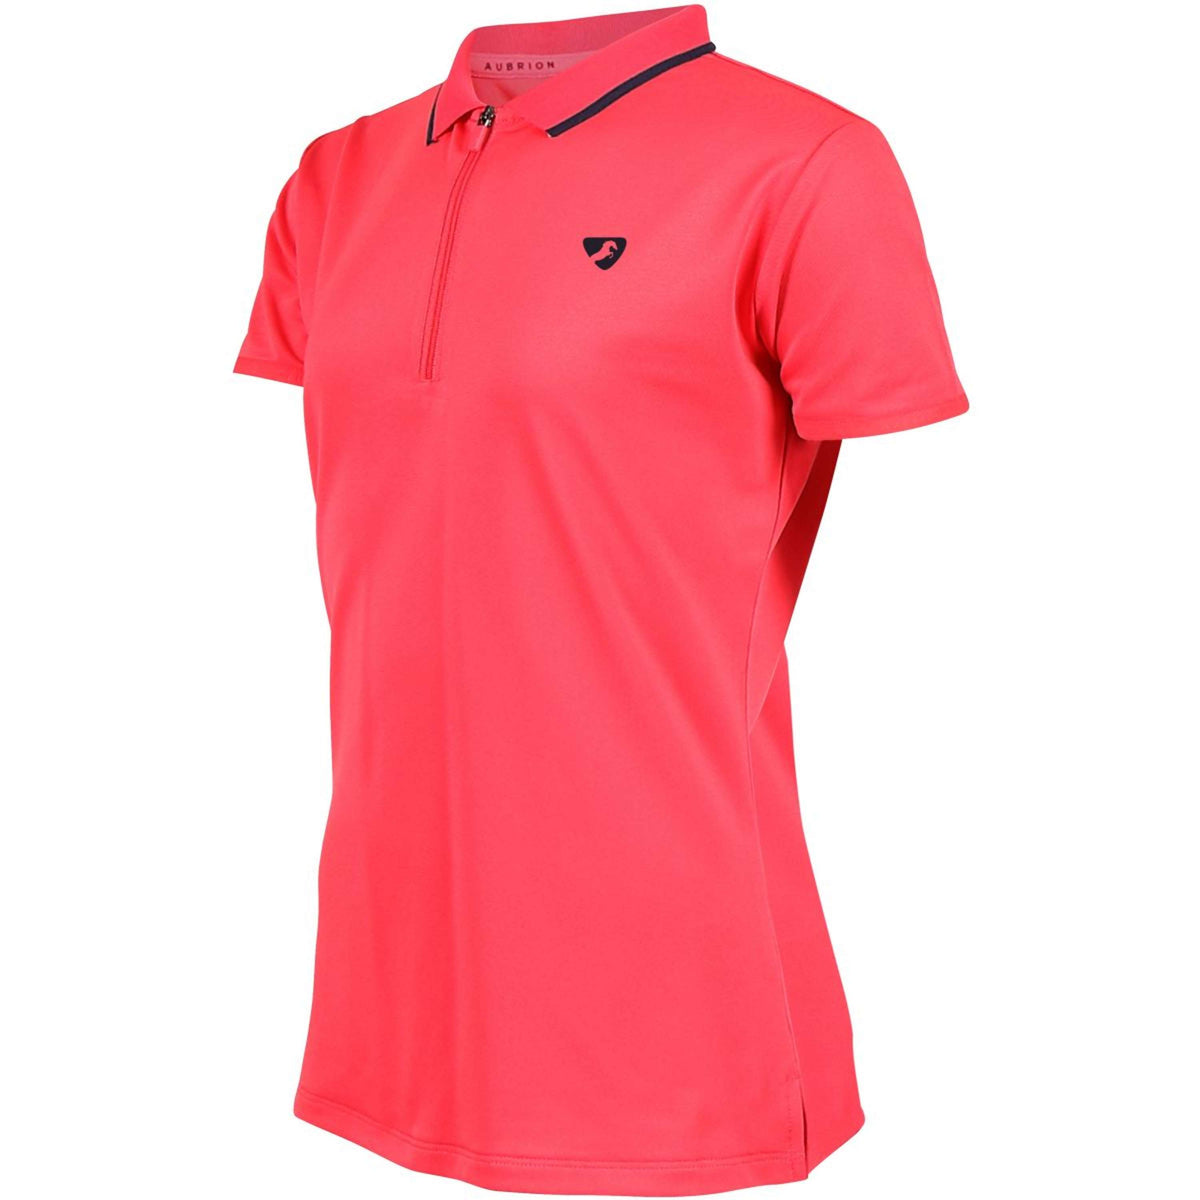 Aubrion Poloshirt Poise Tech Young Rider Koralle